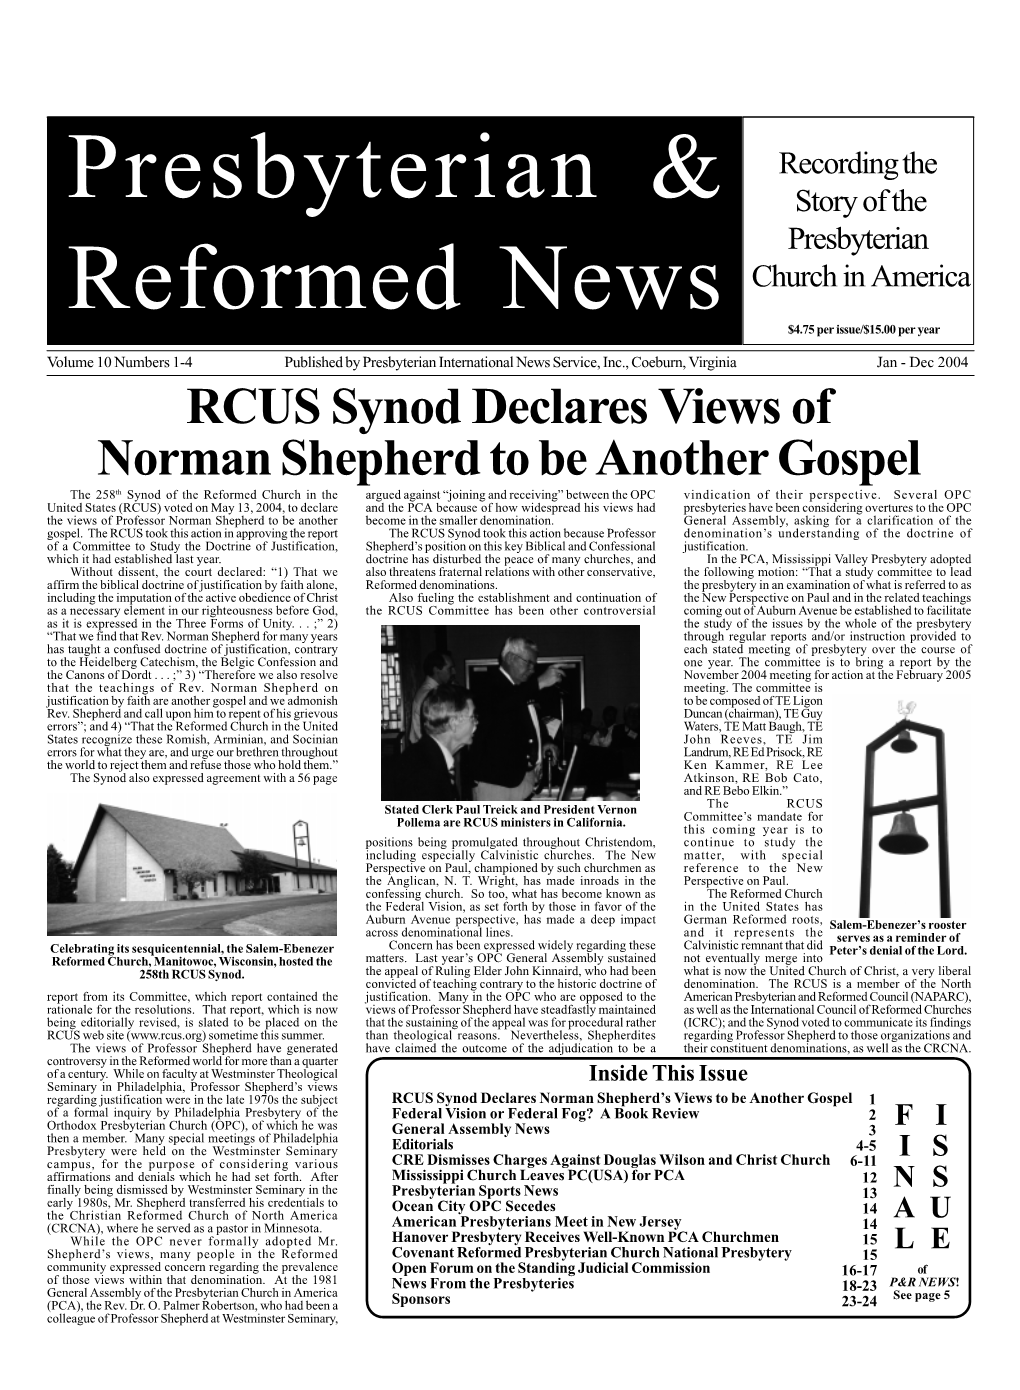 RCUS Synod Declares Views of Norman Shepherd to Be Another Gospel